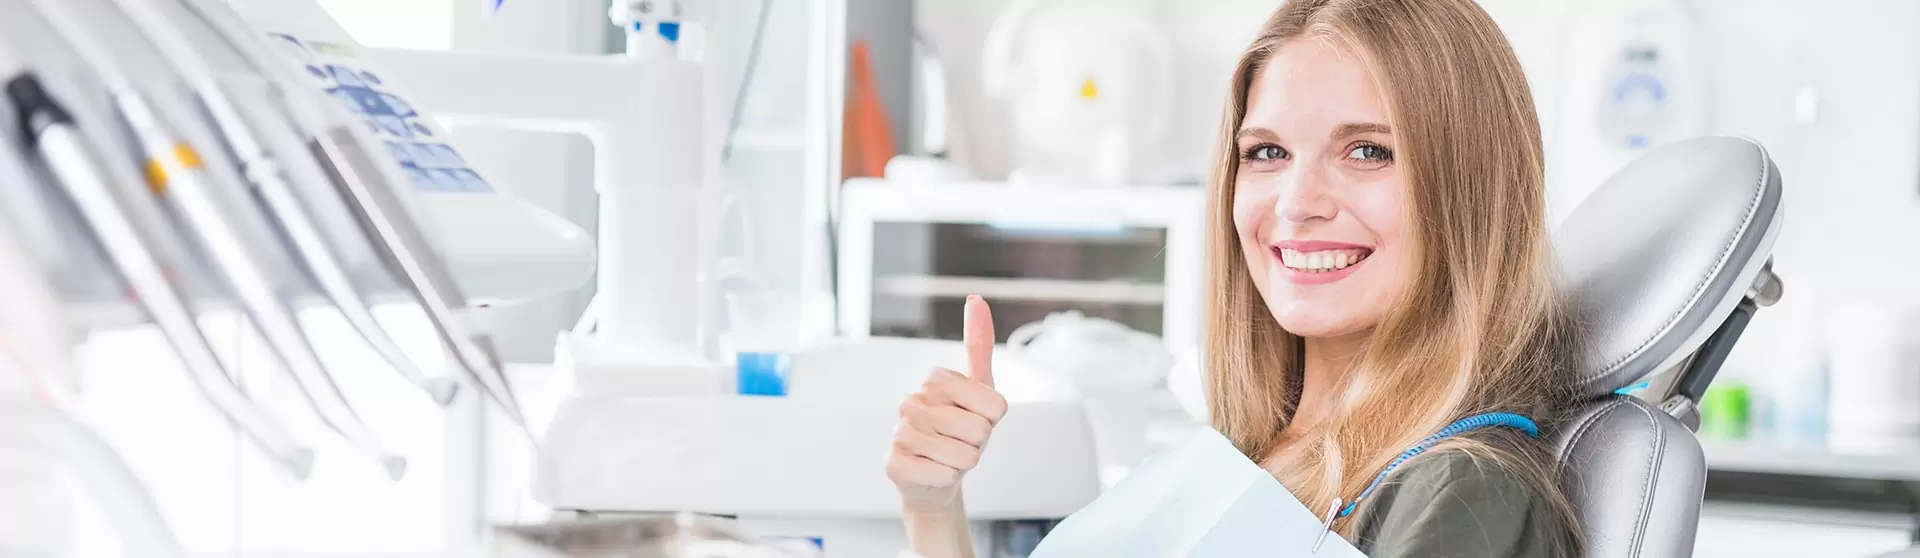 Smiling woman in dental chair giving thumbs up at hamilton cosmetic dentistry